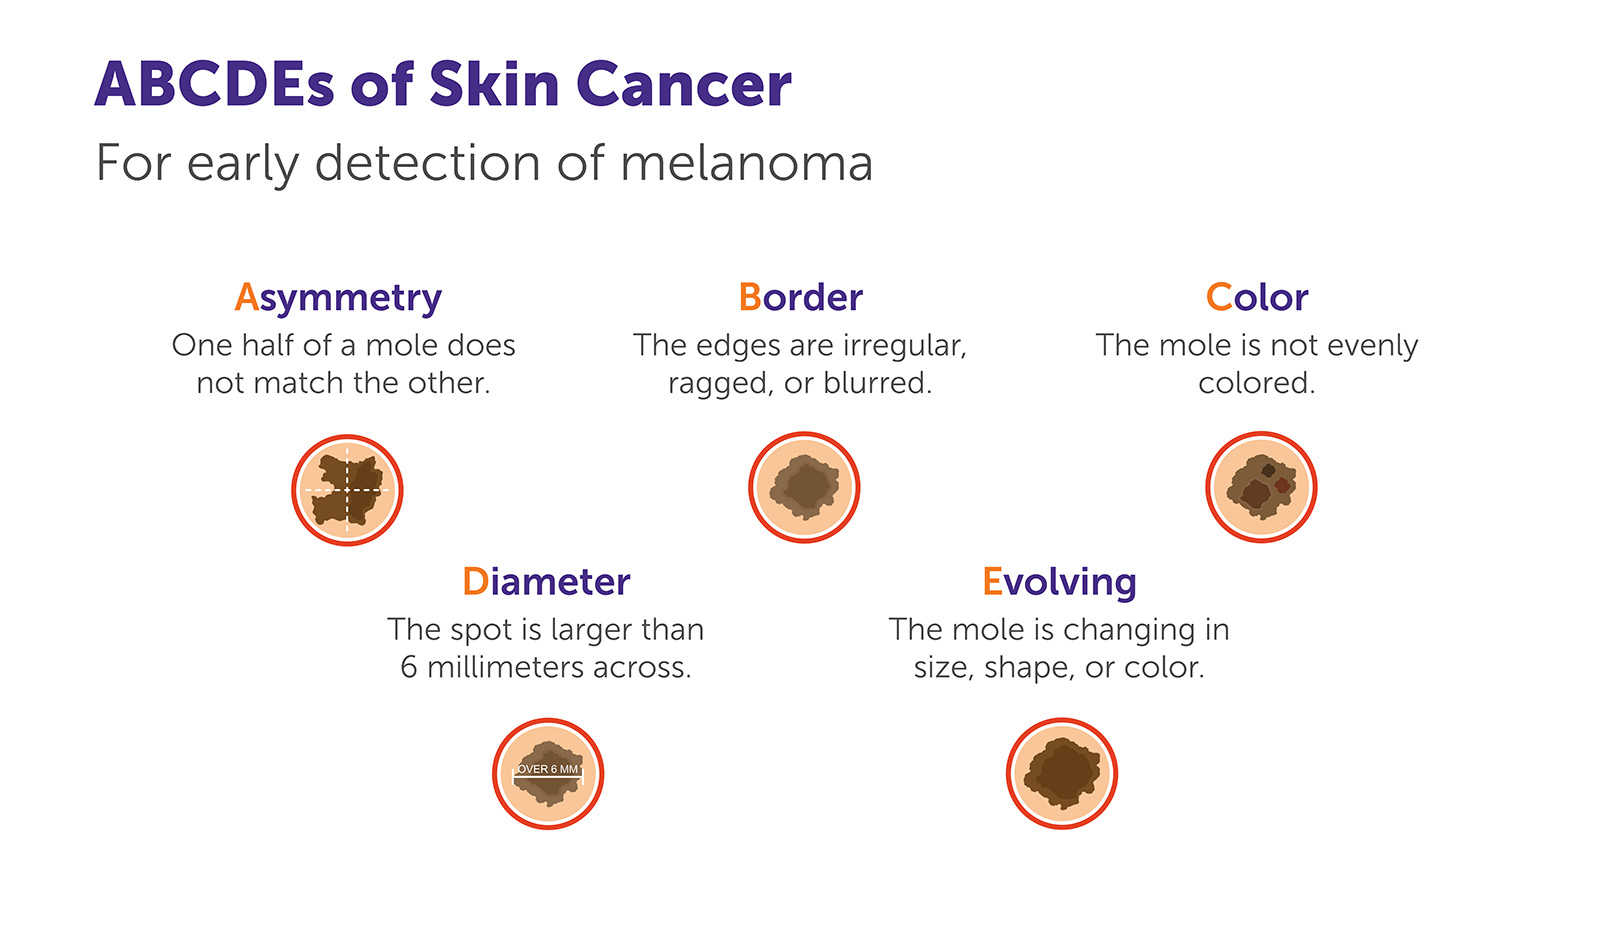 ABCDE's of Skin Cancer